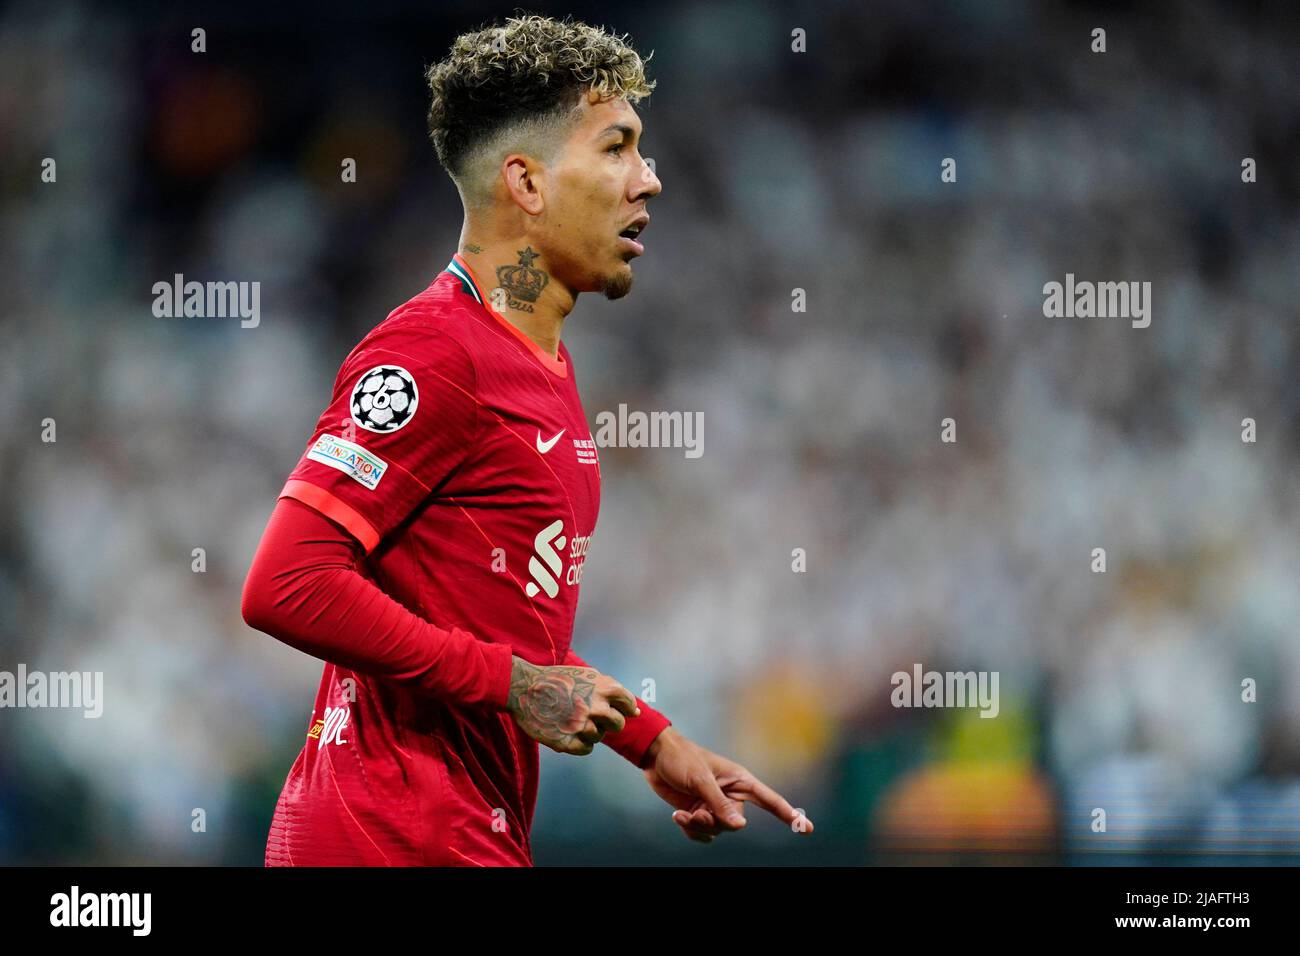 Roberto Firminho of Liverpool FC during the UEFA Champions League Final match between Liverpool FC and Real Madrid played at Stade de France on May 28, 2022 in Paris, France. (Photo / Magma) Stock Photo